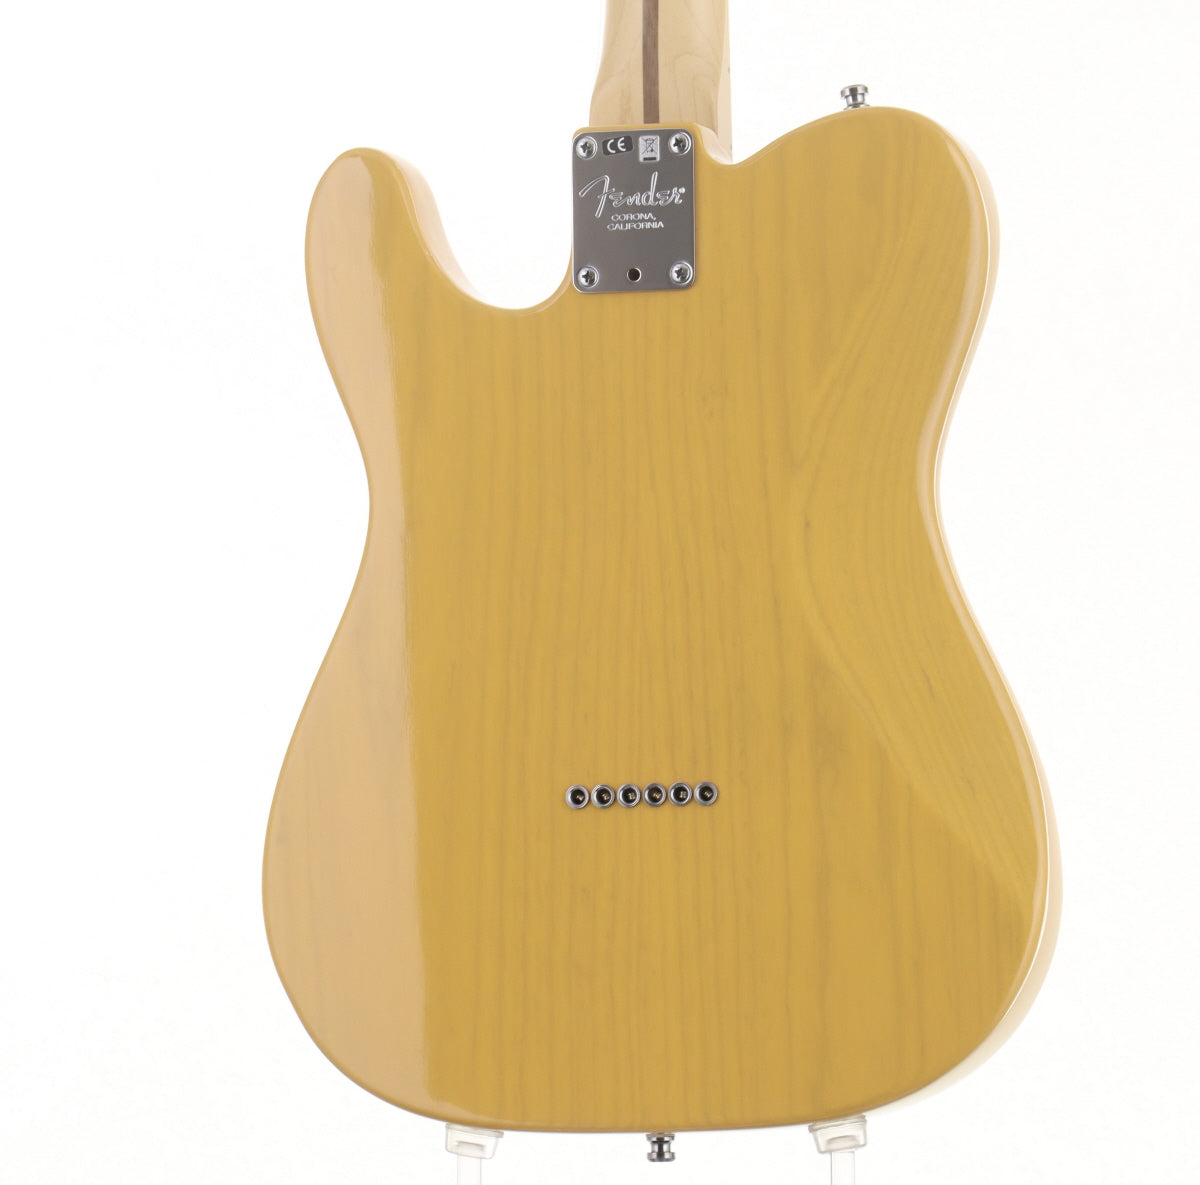 [SN US14014500] USED Fender / American Deluxe Telecaster N3 Ash Butterscotch Blonde 2014 [09]